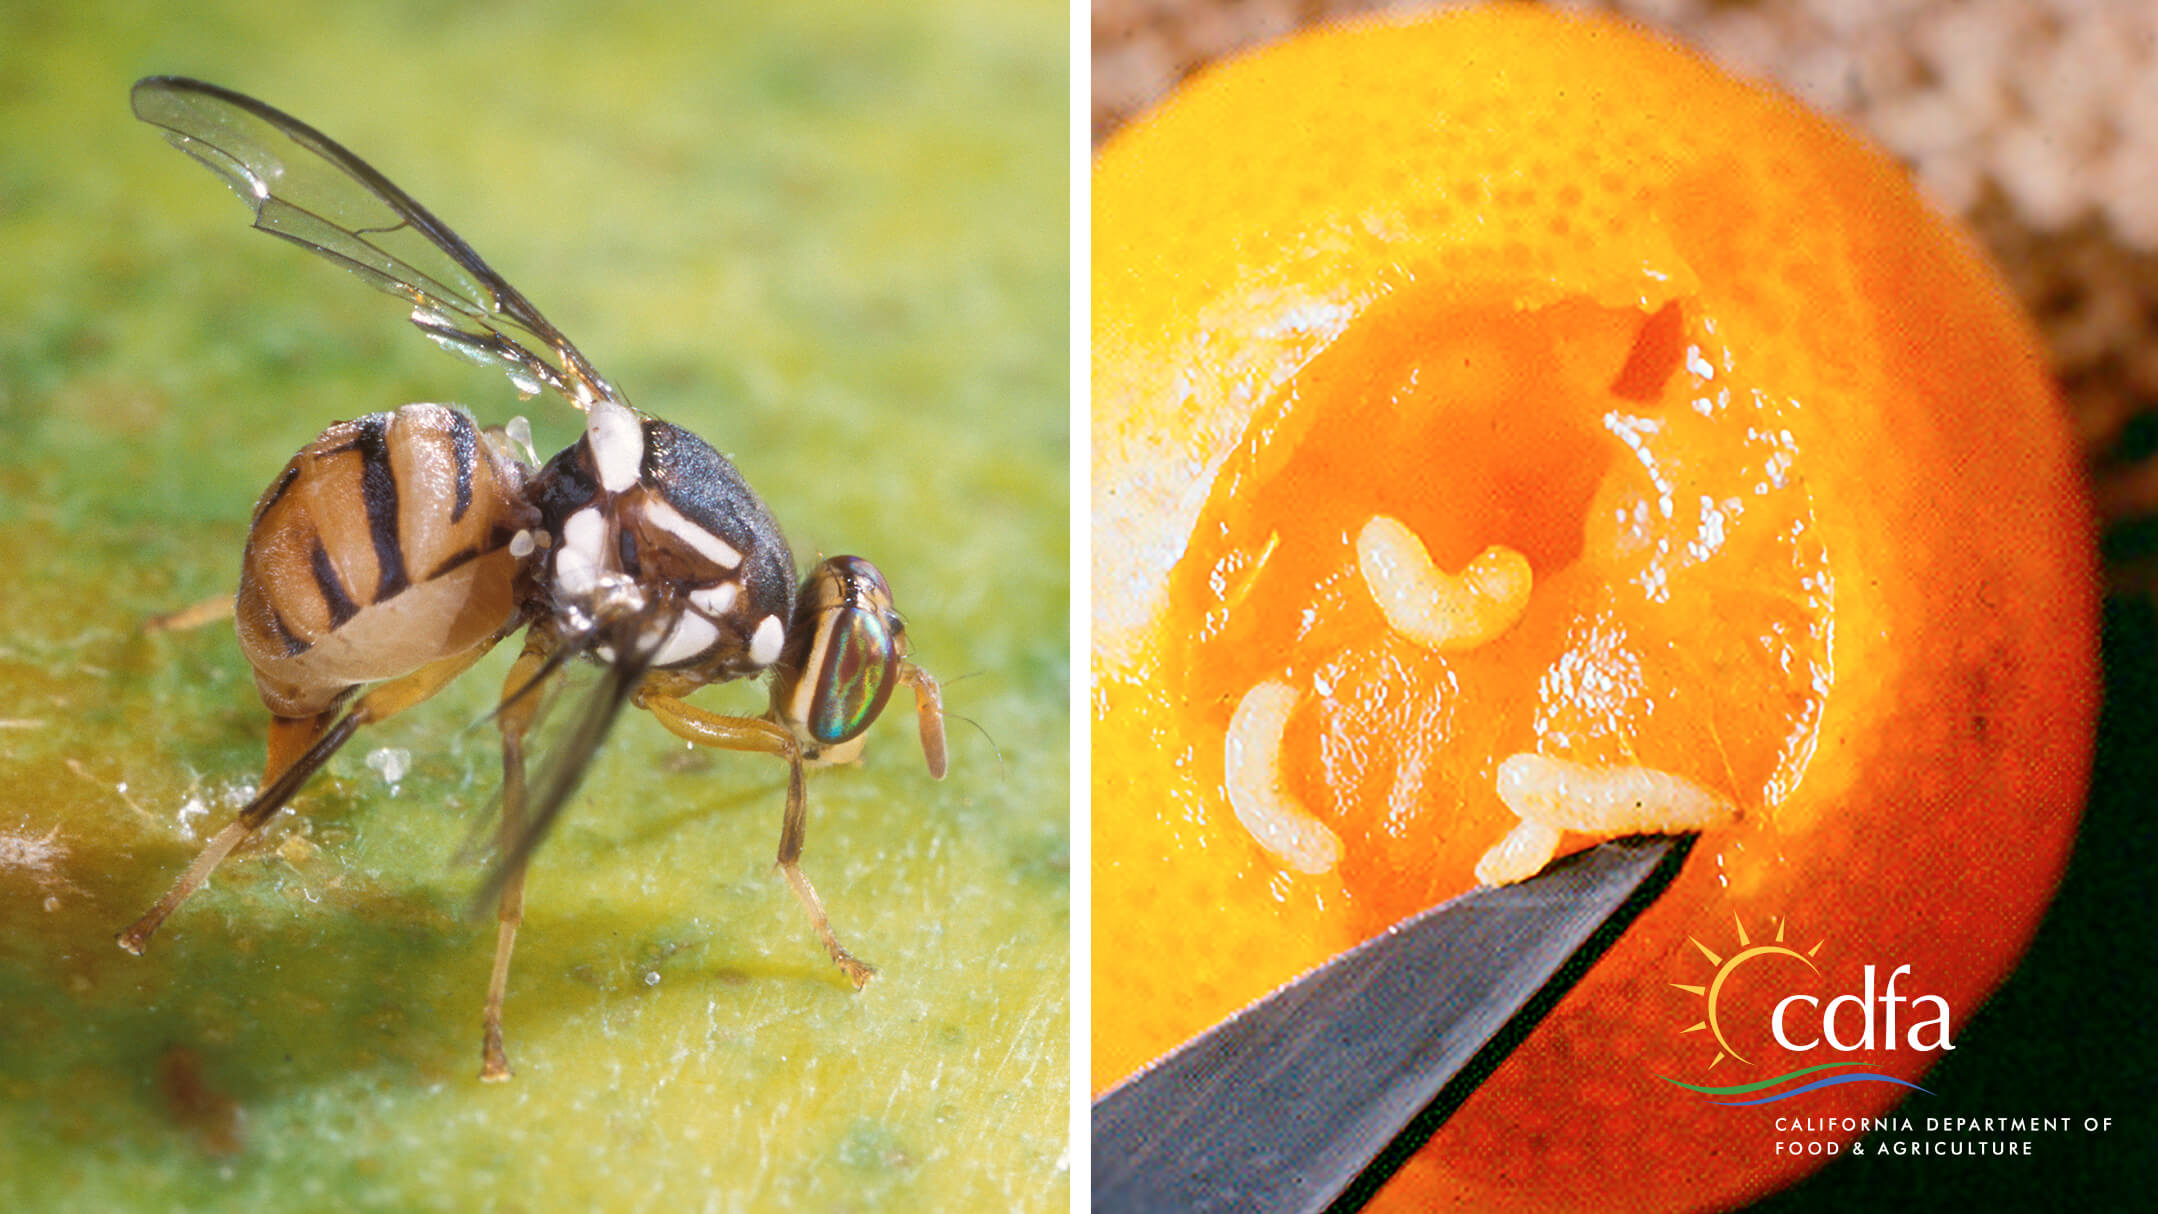 A closeup of a fruit fly on a price of fruit and another photo of an orange cut open displaying white maggots inside.